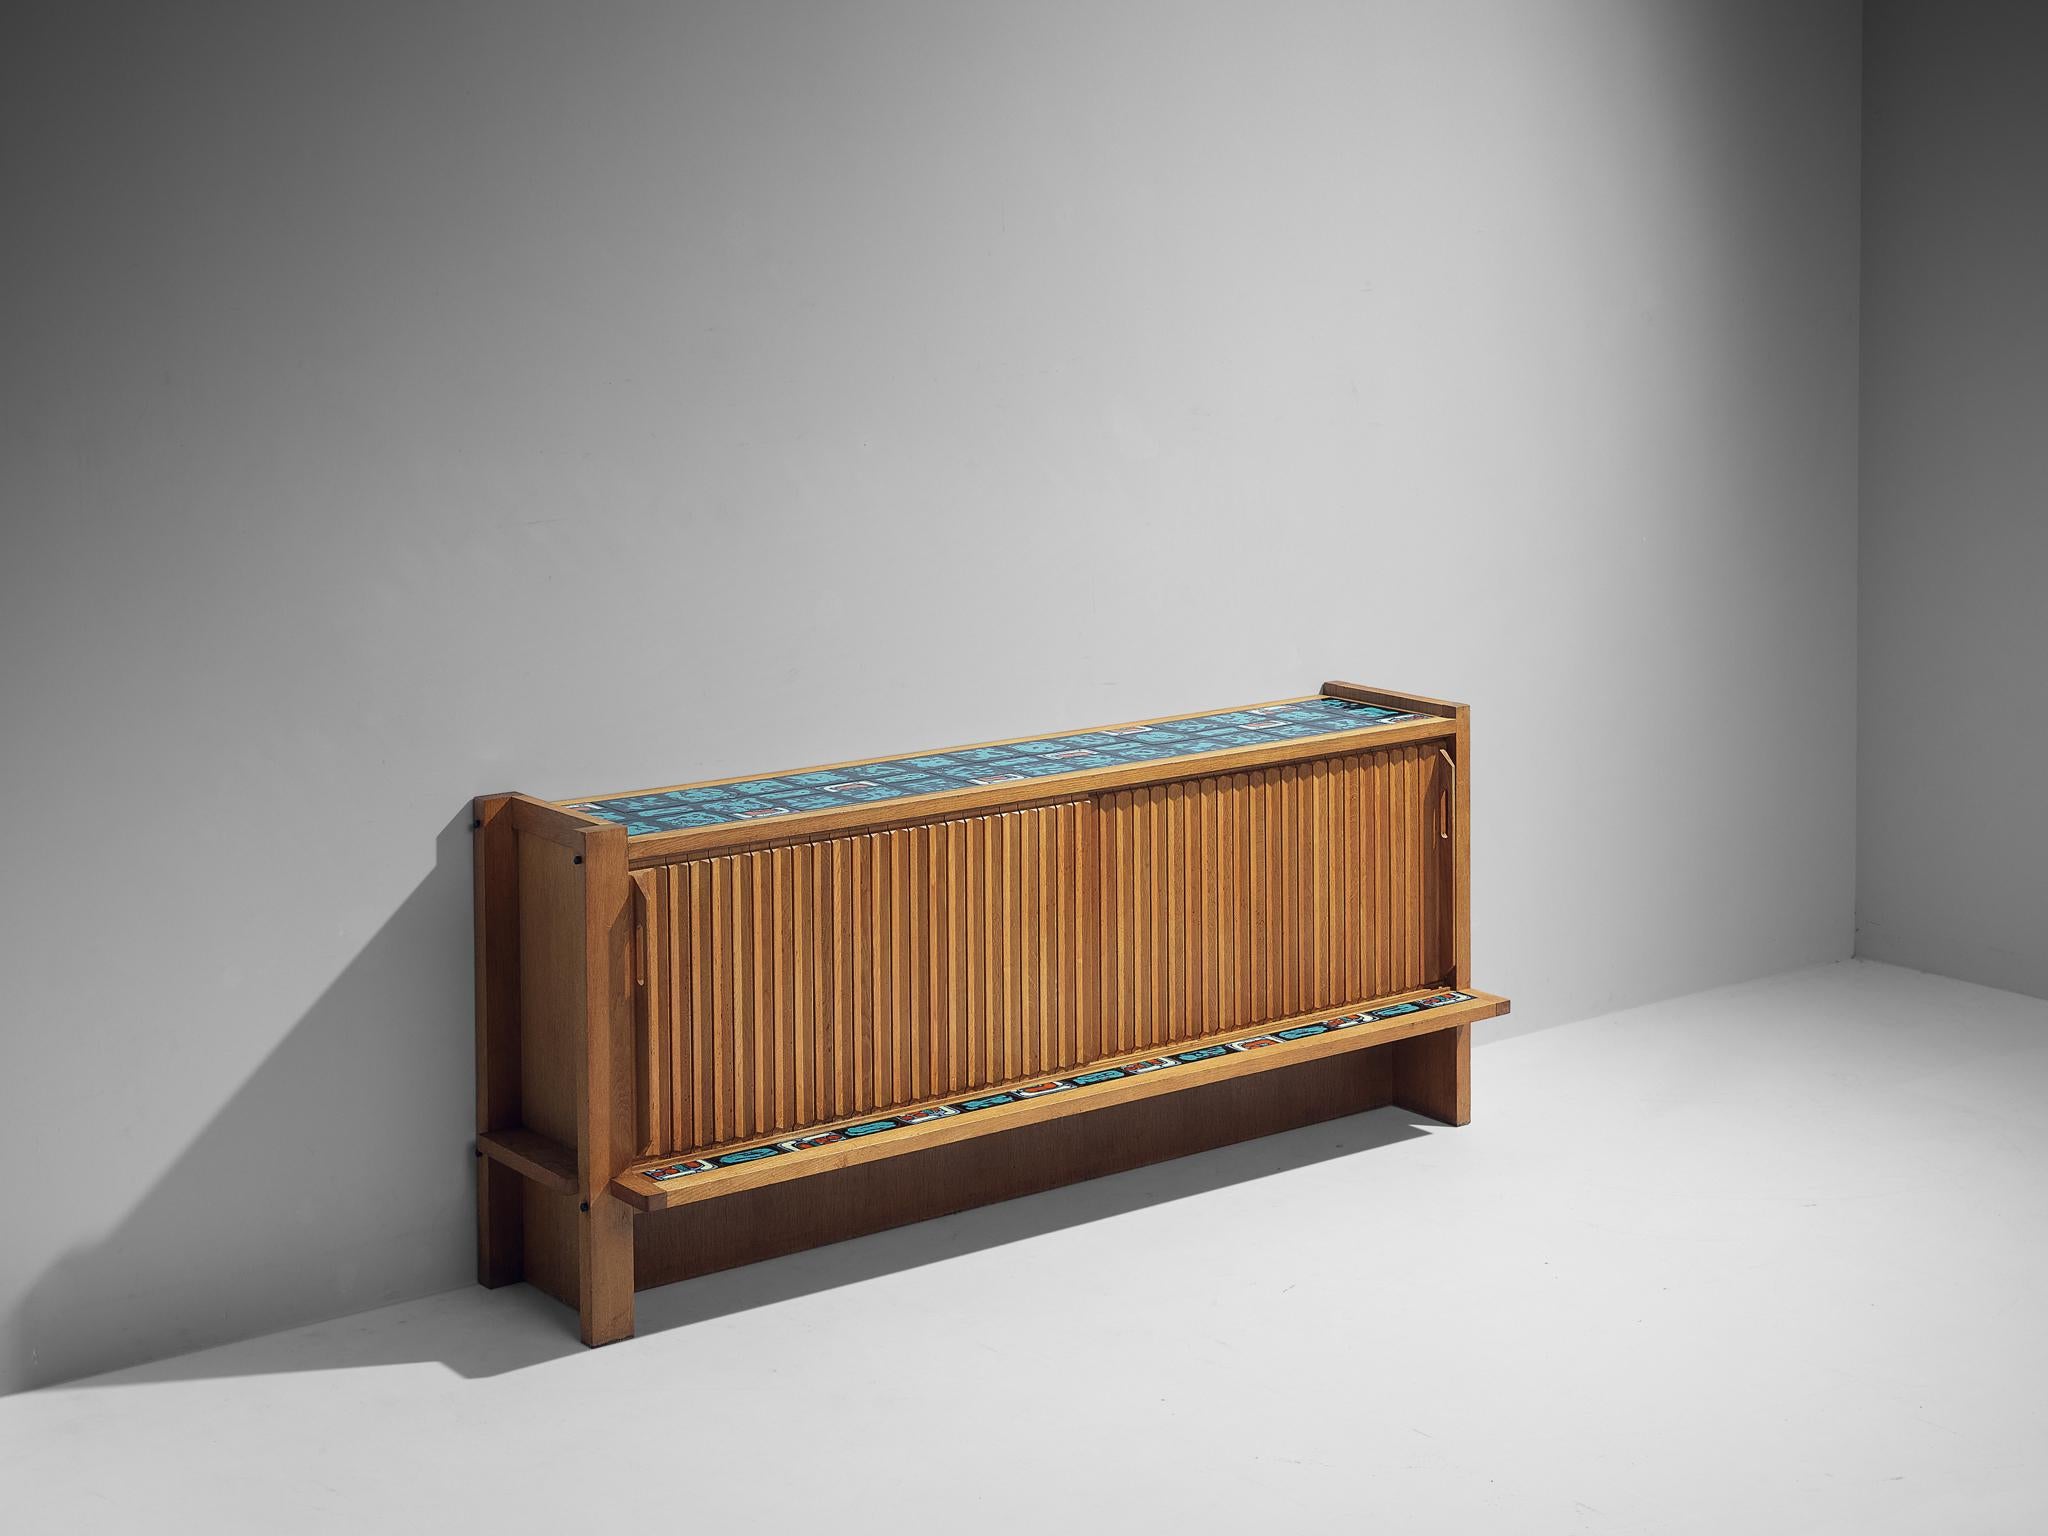 Guillerme et Chambron, sideboard, oak and ceramic, France, 1960s.

Outstanding sideboard in solid oak with ceramic tiles glazed in black, red and turquoise on top. This cabinet holds the characteristics of the French designer duo Guillerme et